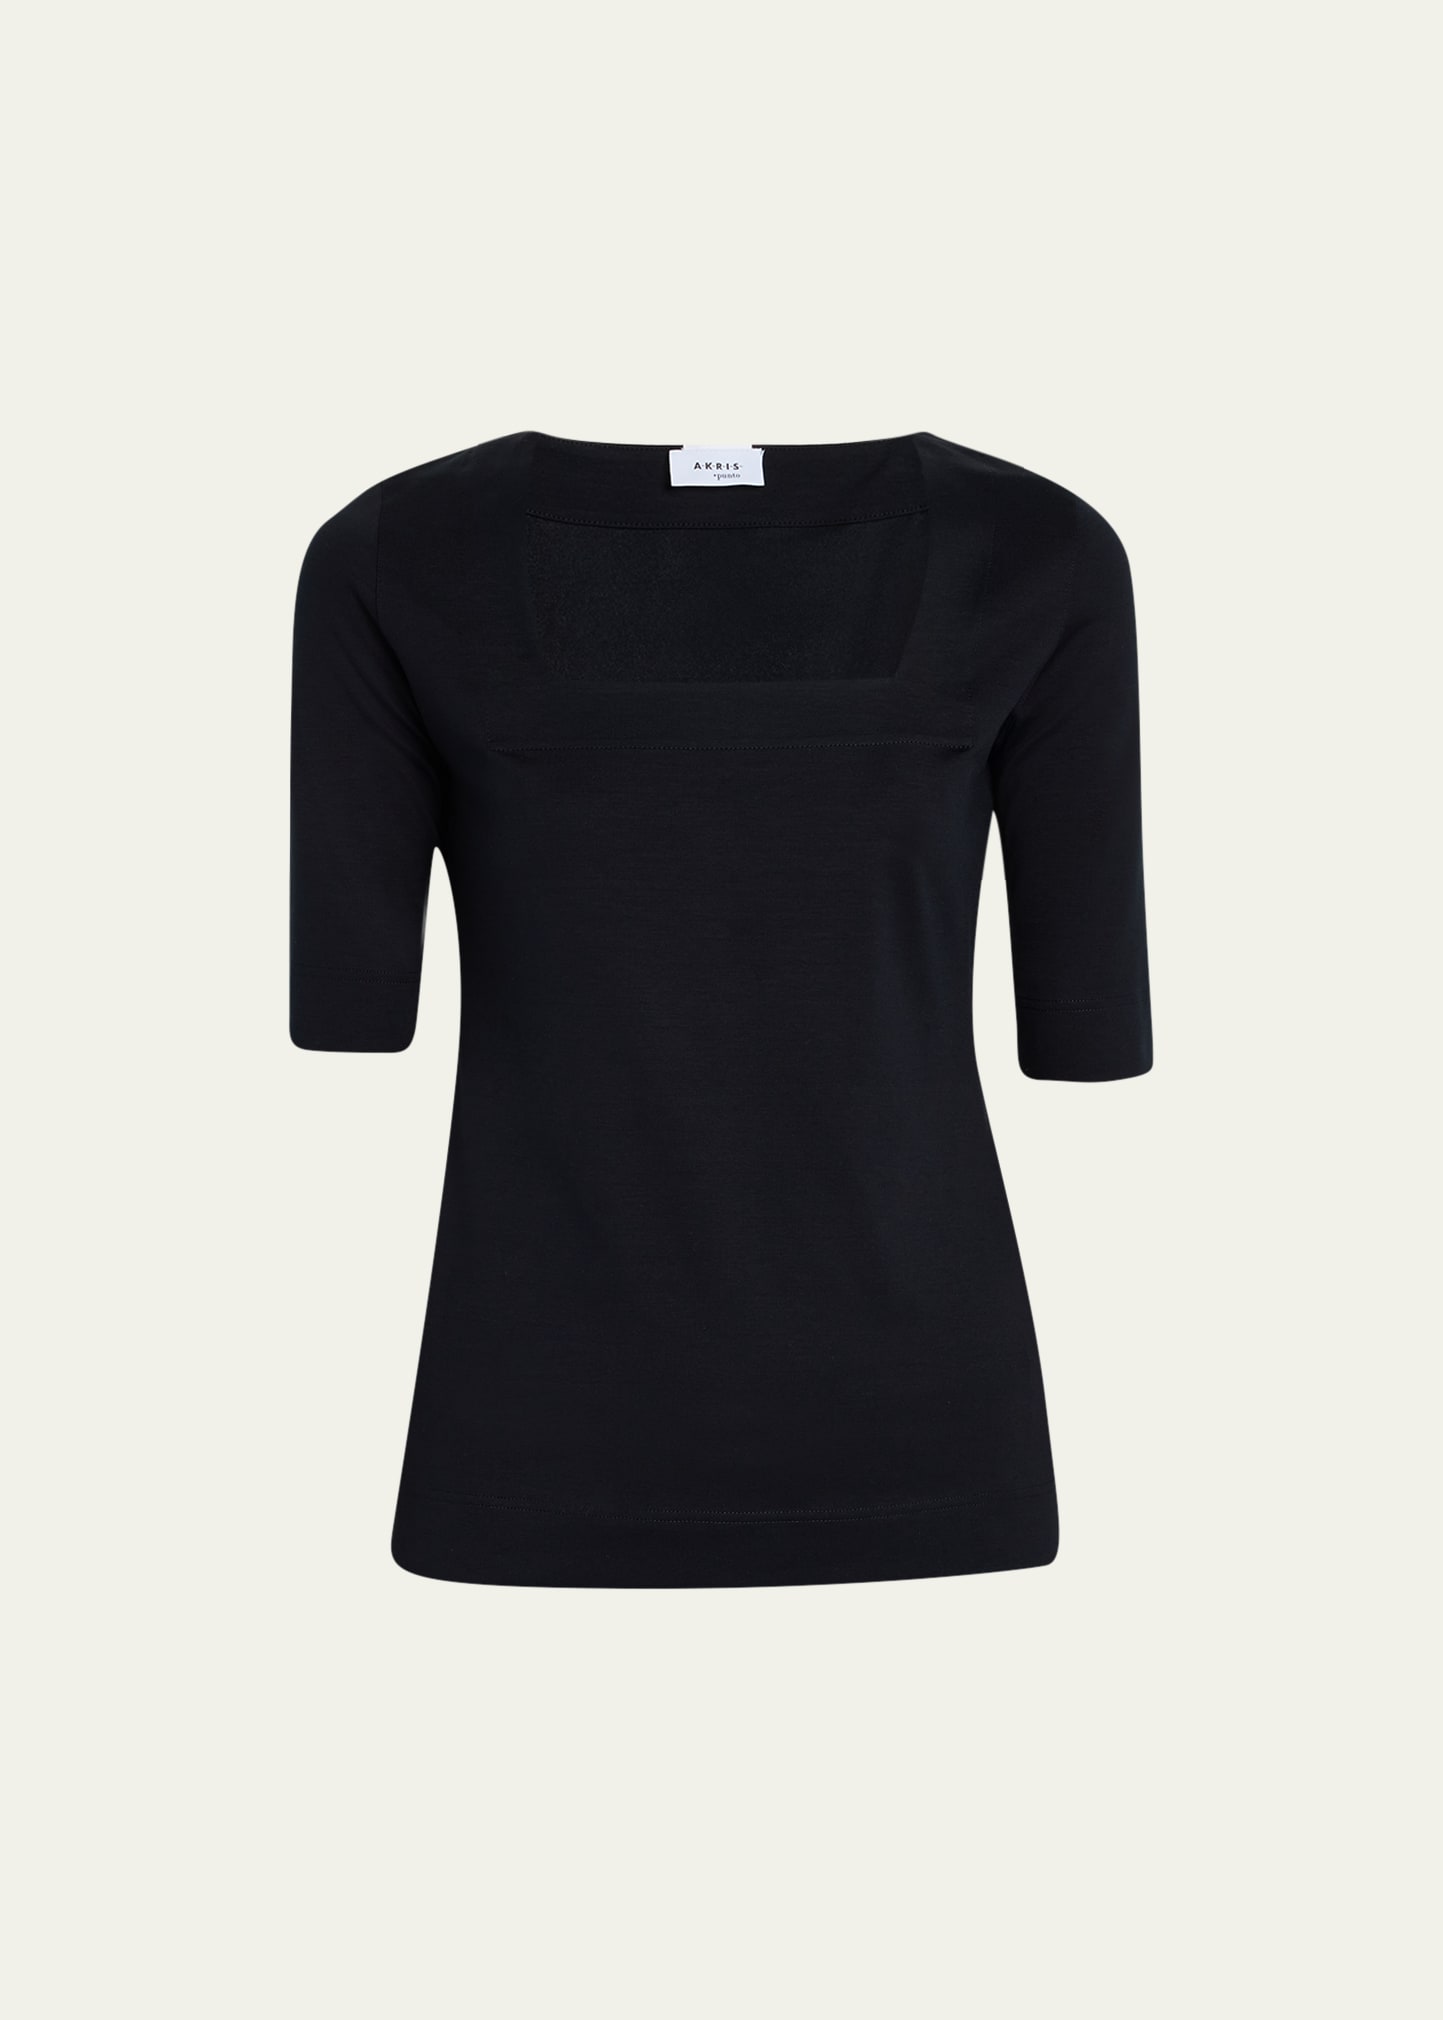 Square-Neck Jersey Top